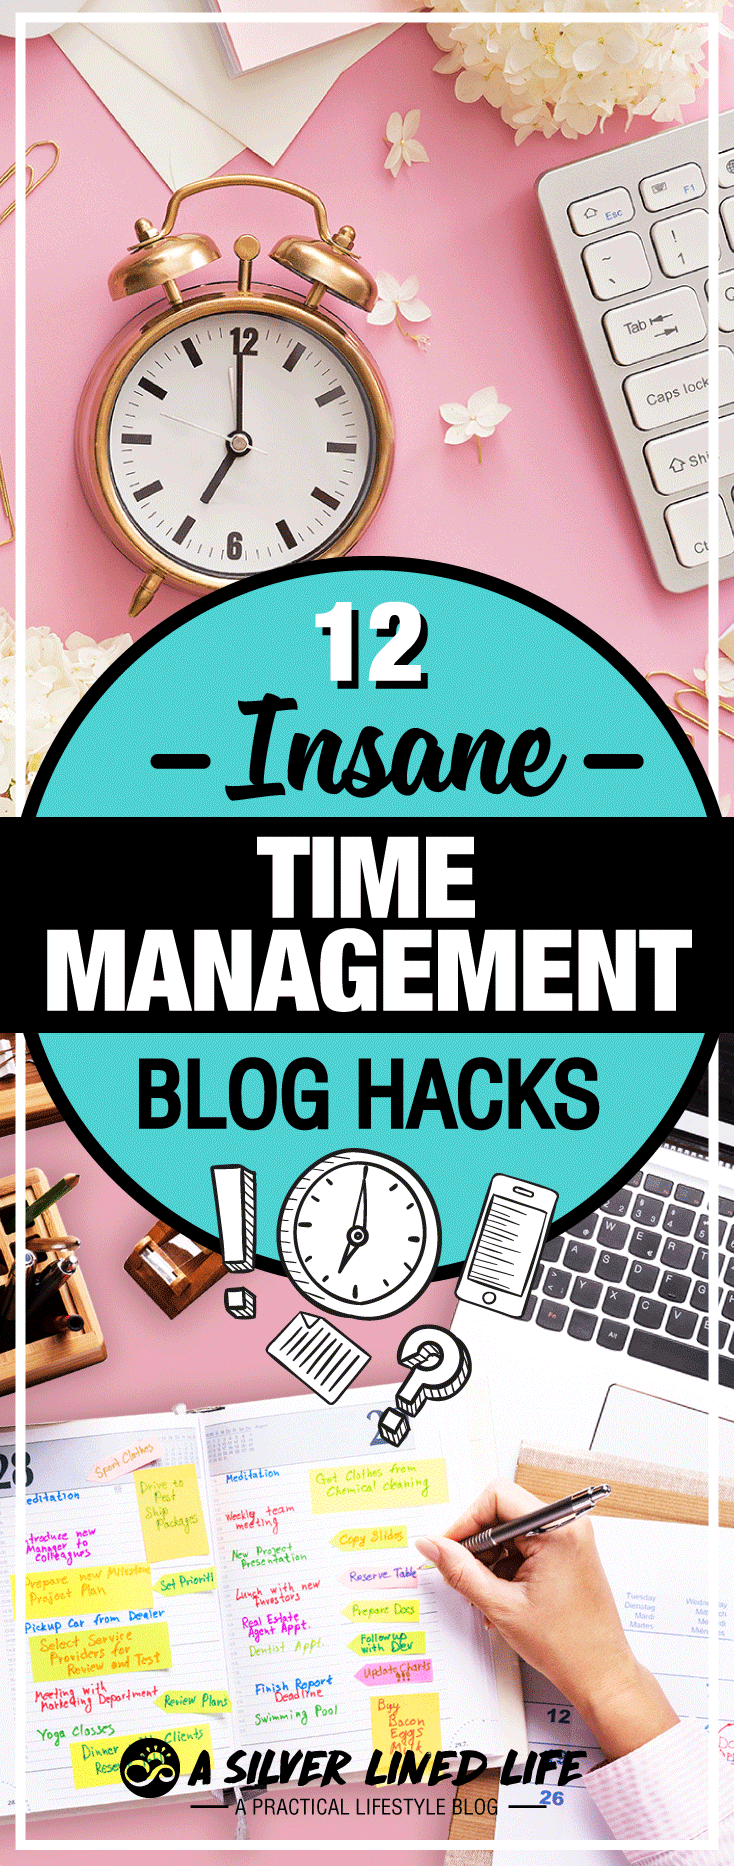 12 Insane Time Management Hacks For Bloggers - Mind blowing tips that work! For moms busy blogging at home, here is the perfect planner and schedule for you!! These 12 strategies include tools, techniques, a template and a worksheet that will help you succeed. This will be your #1 blog planner! Blogging for beginners or for money. Here are ideas to help you plan topics, tips to help with posts and inspiration to move you forward. #SLL